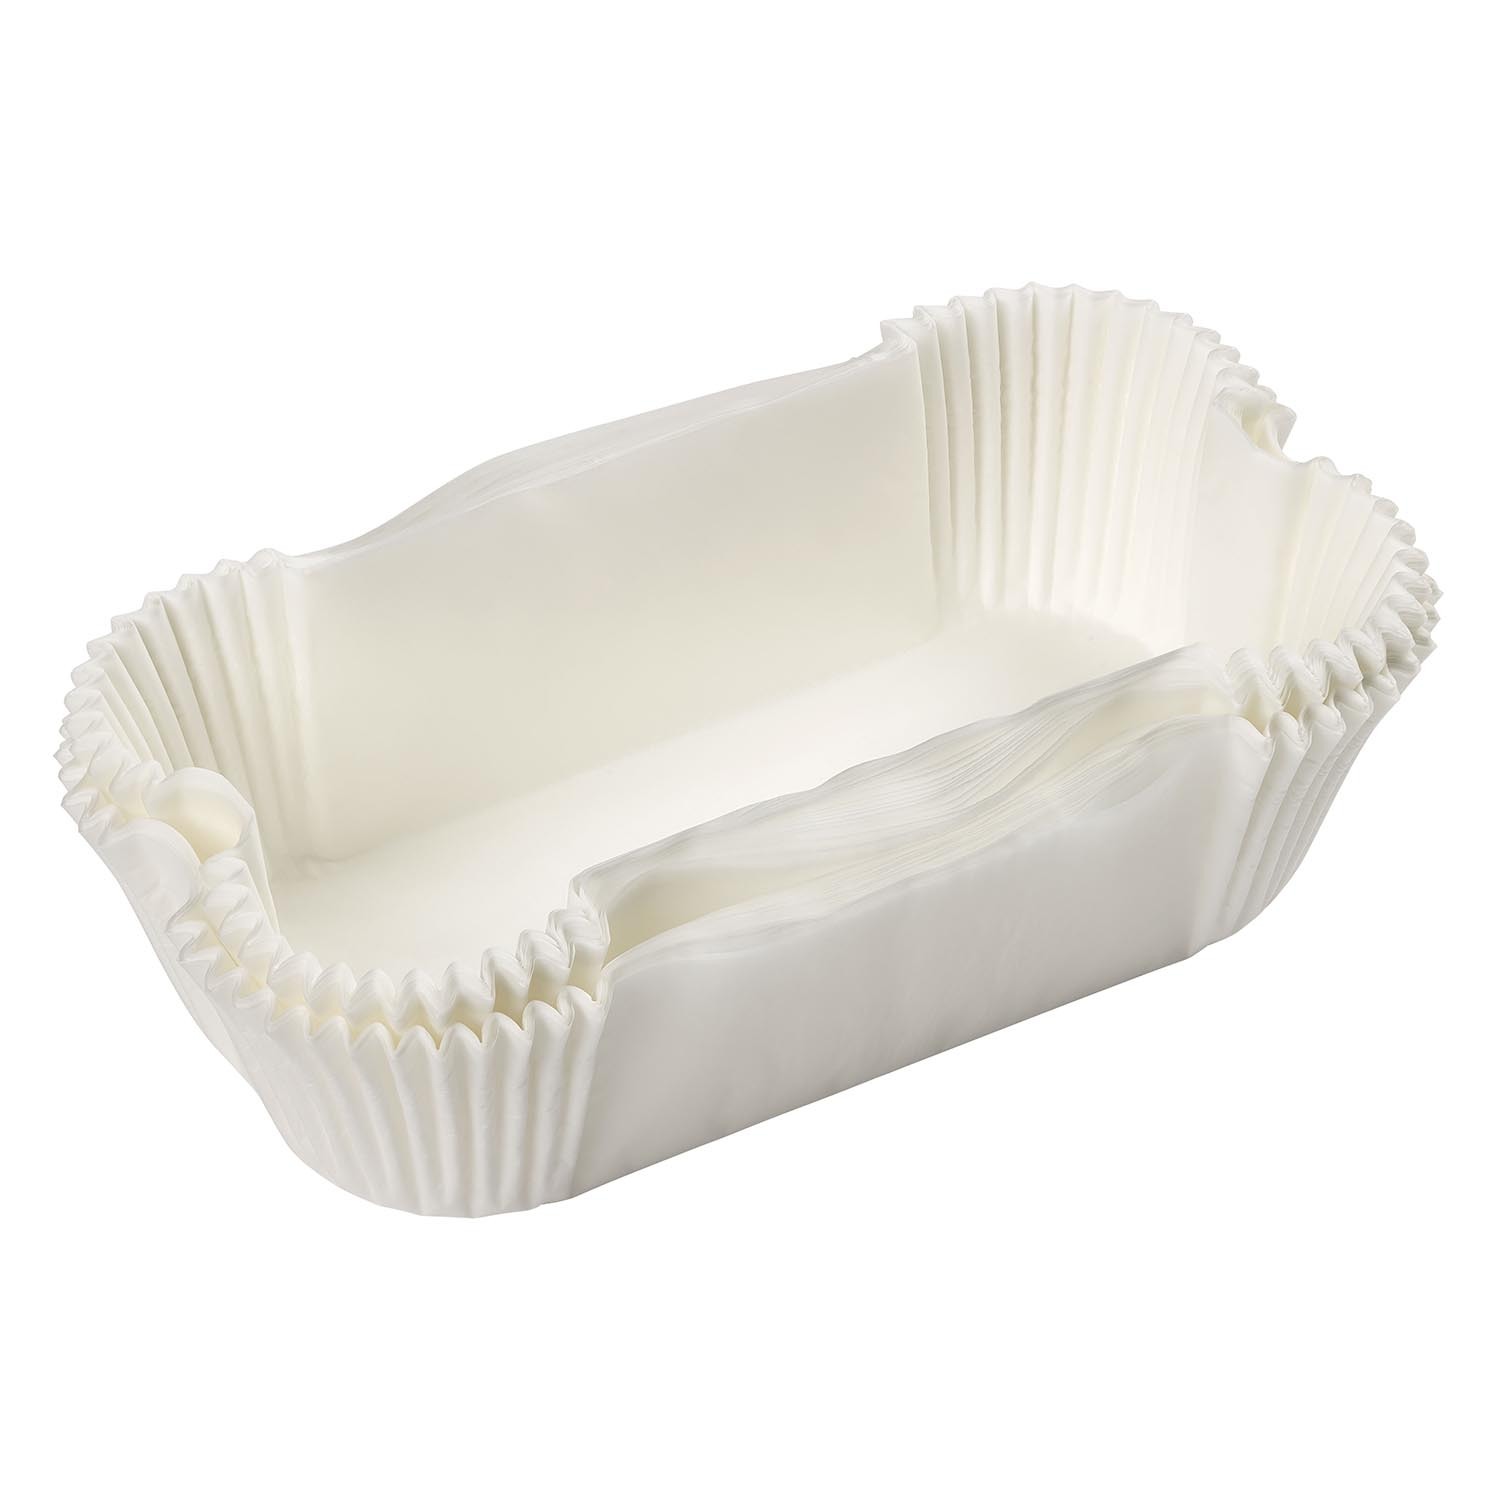 Pack of 40 Siliconised Loaf Liners - White Image 3